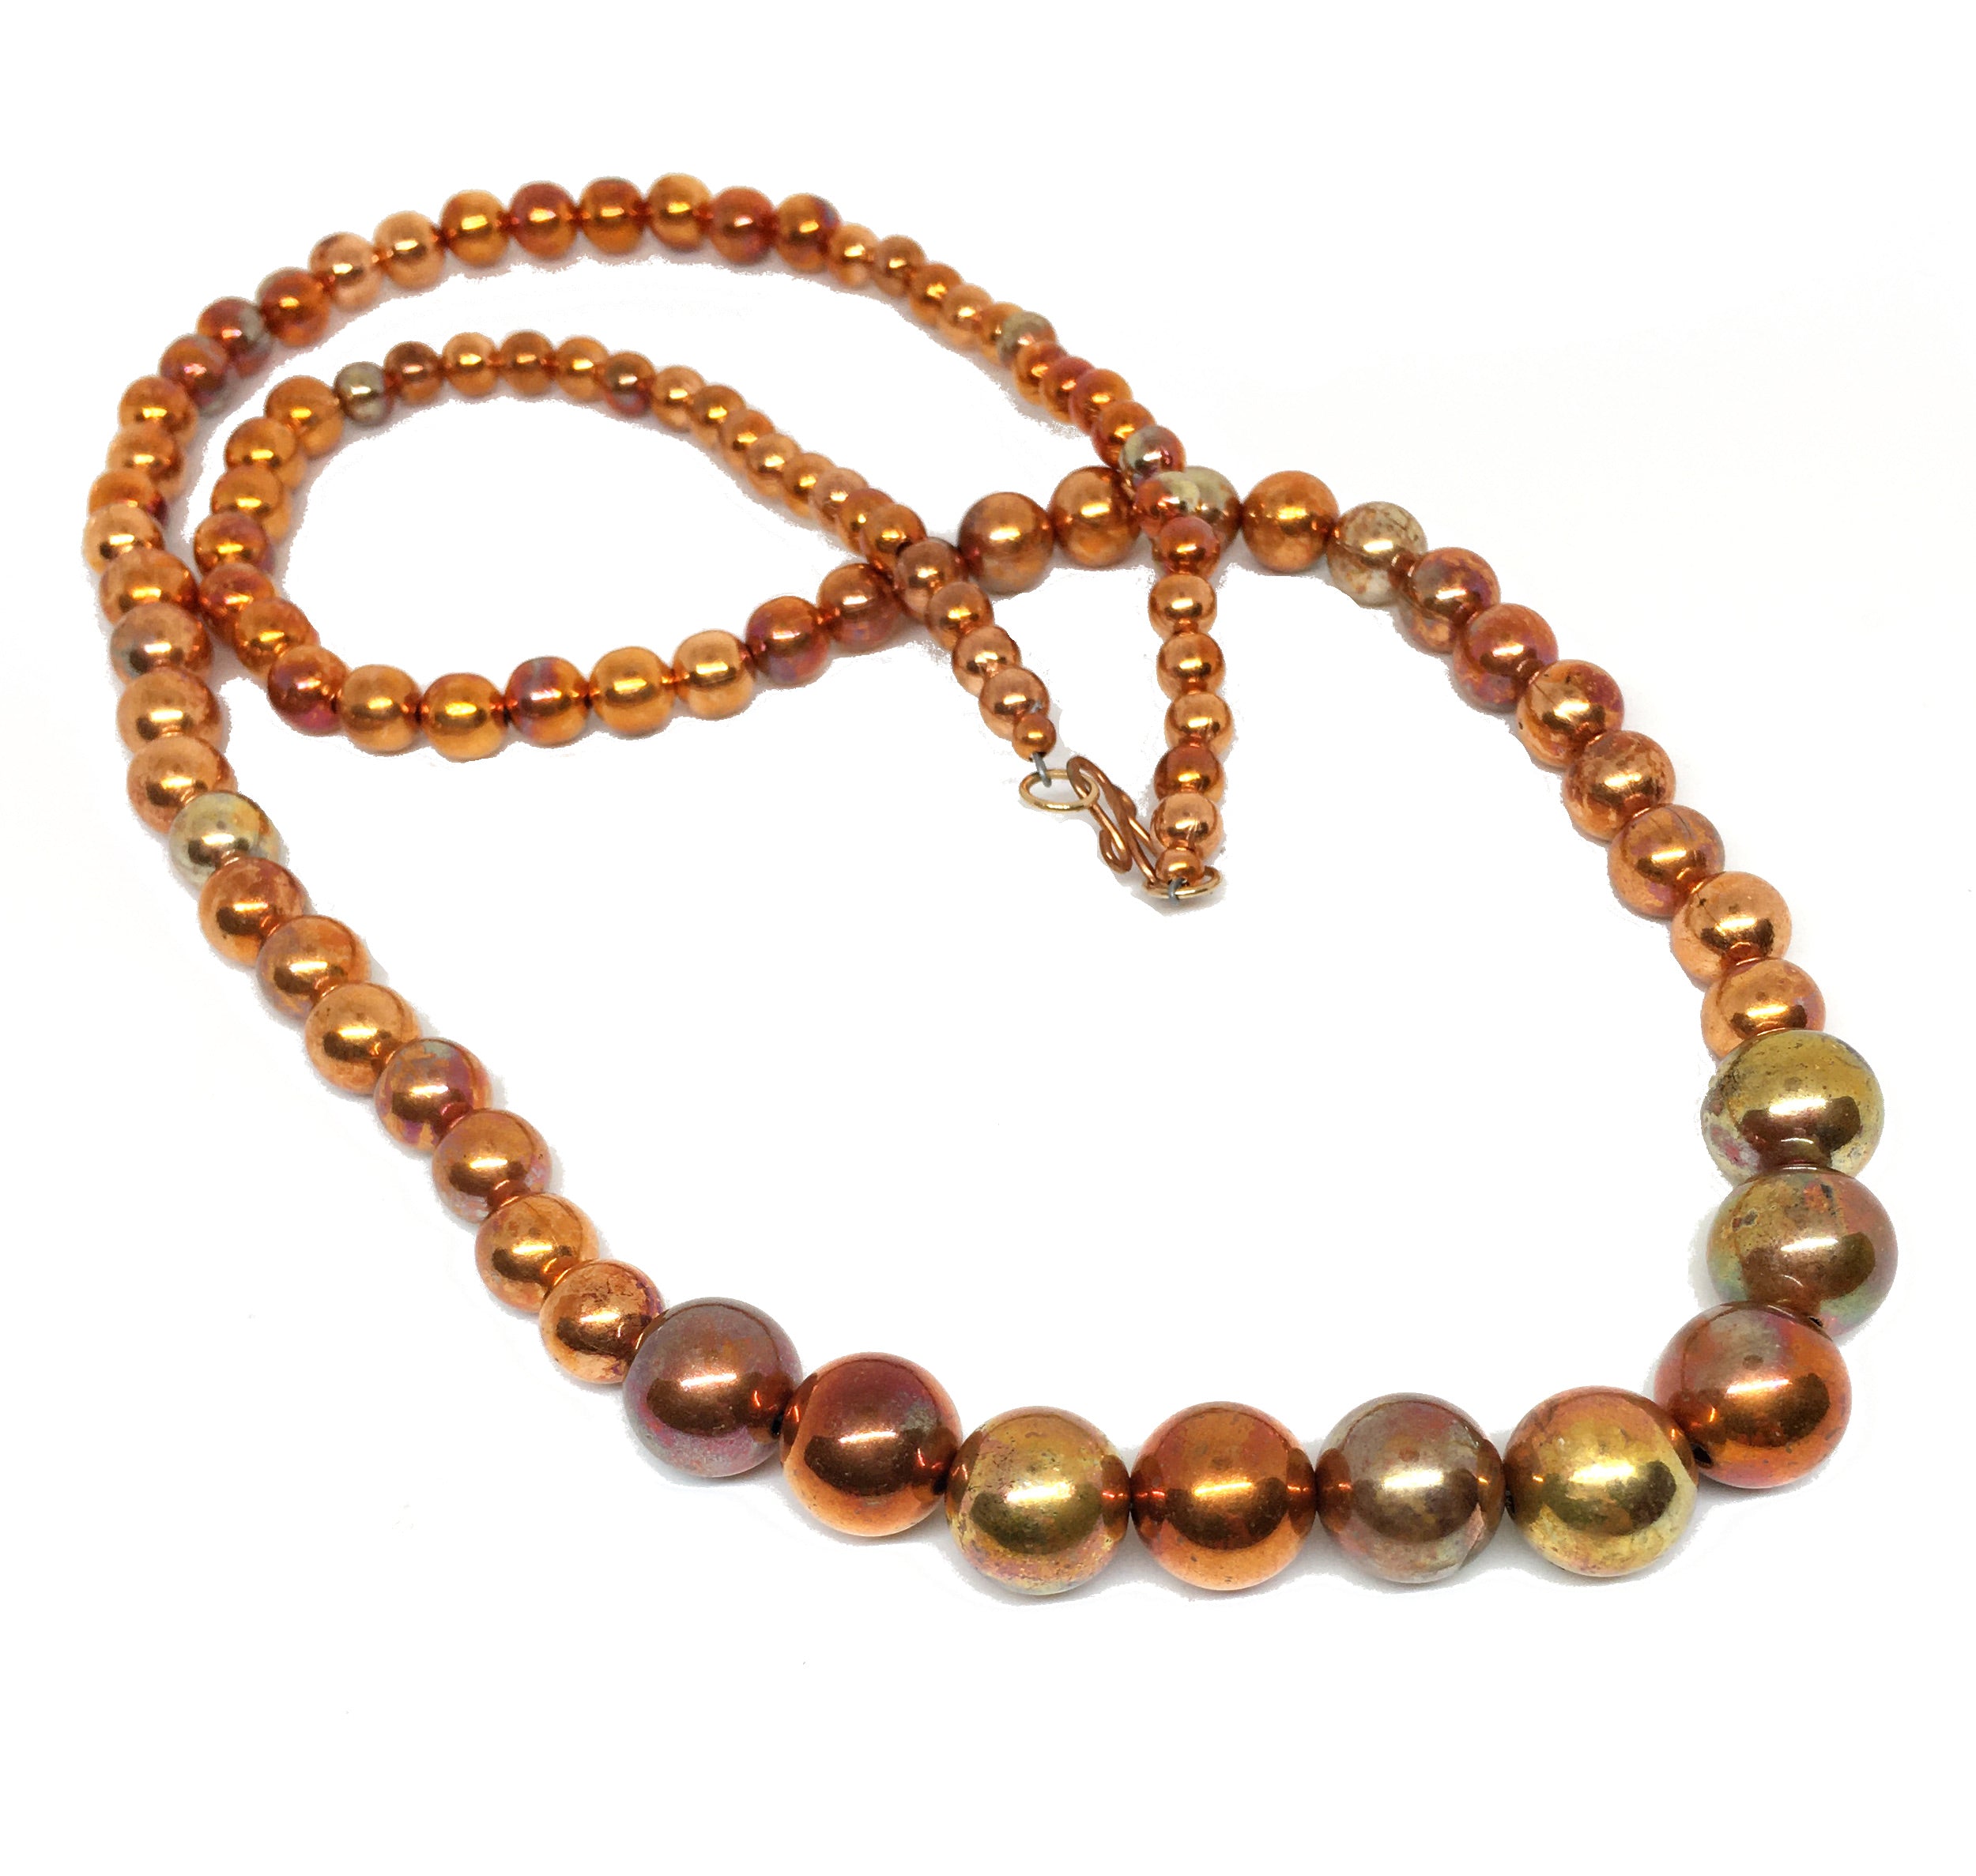 Long Graduated Flame Painted Copper Bead Necklace - Sonoran Sunset Collection